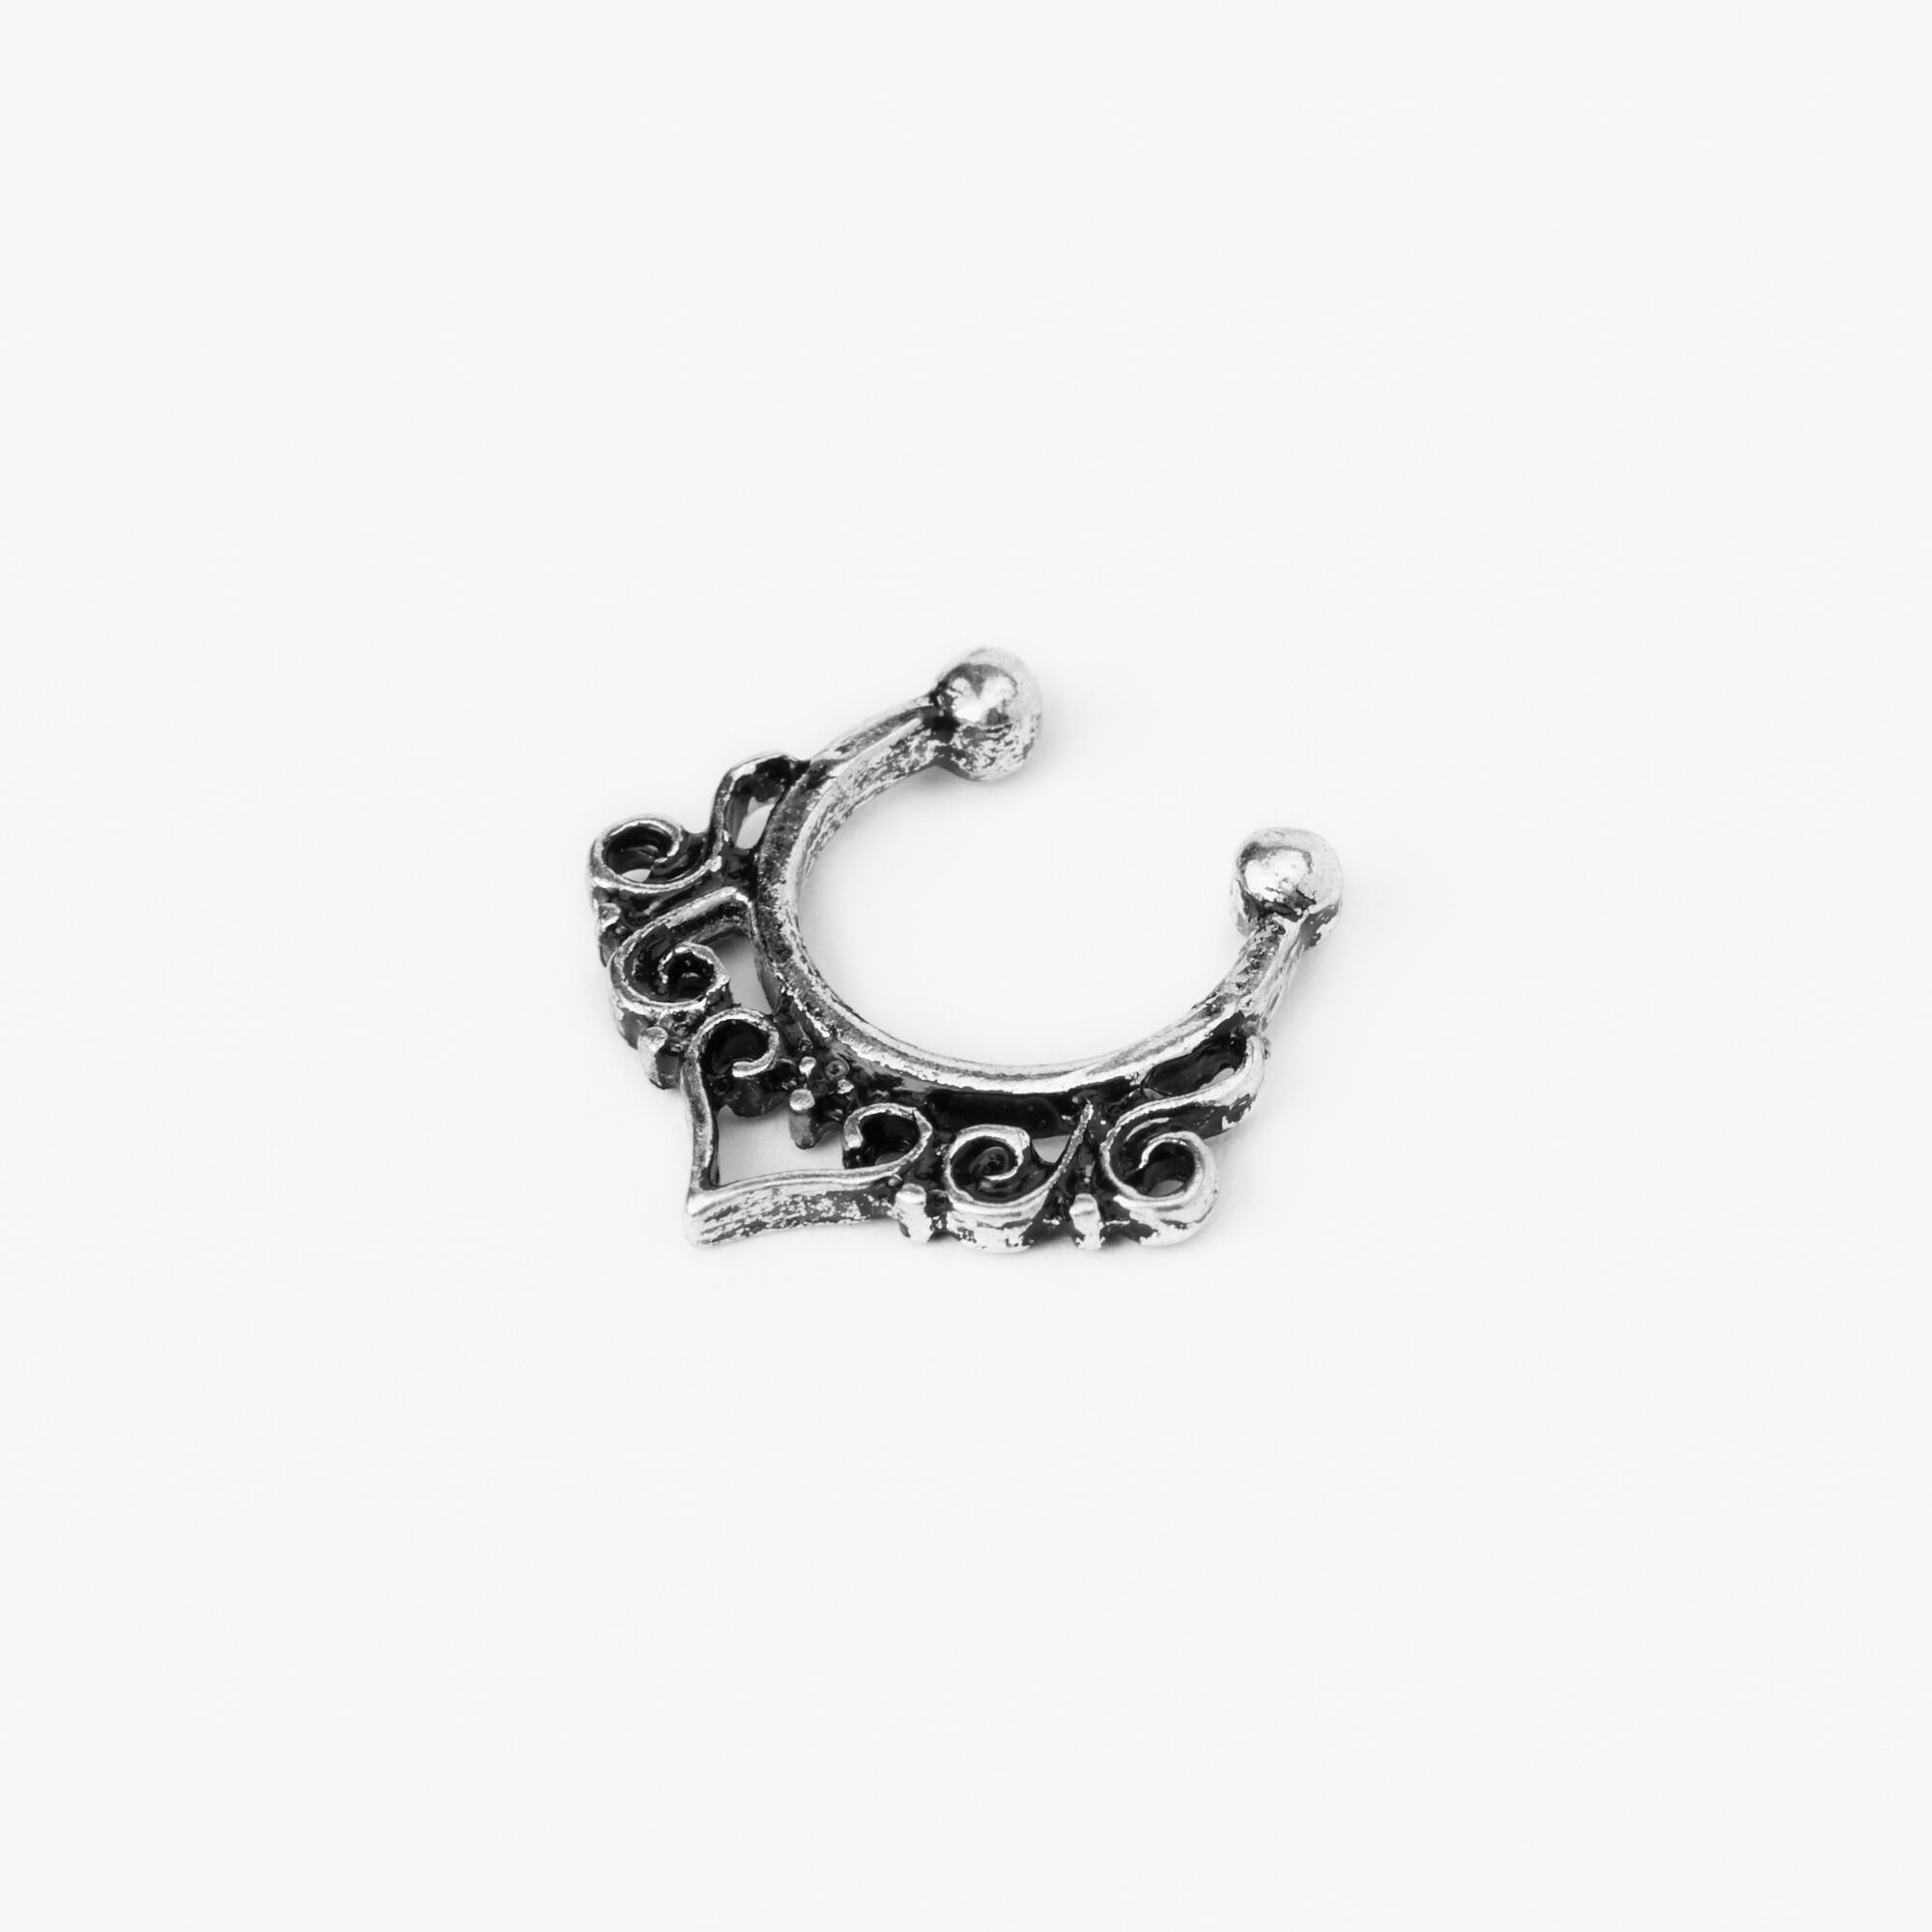 View Claires Tone Faux Boho Septum Nose Ring Silver information